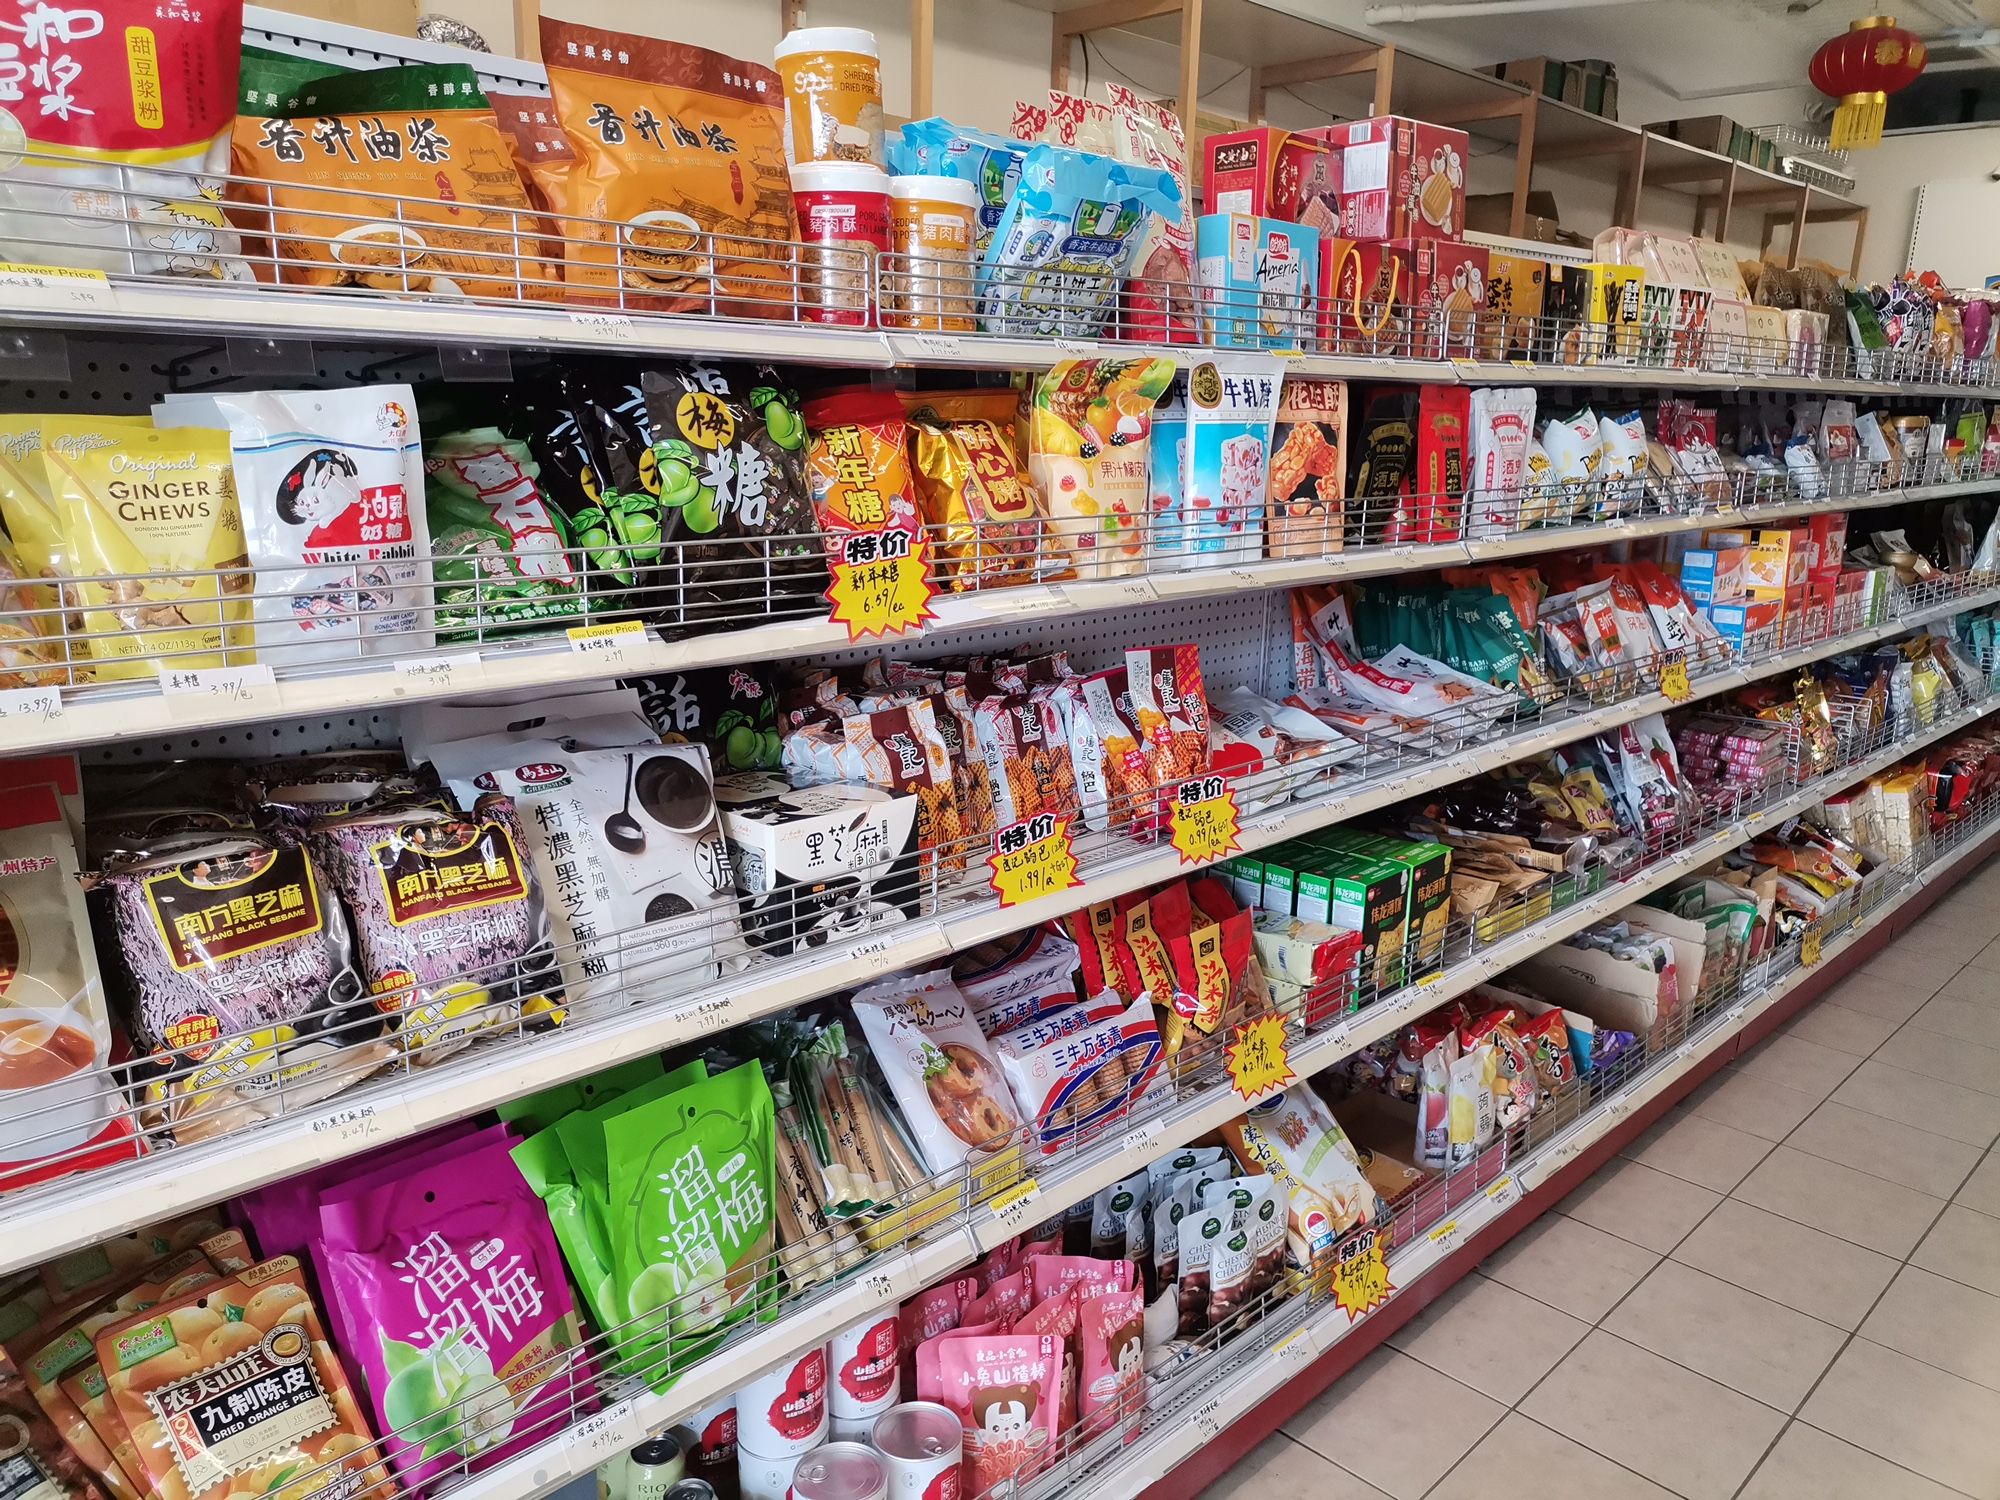 Grocery Store business for sale Calgary Alberta